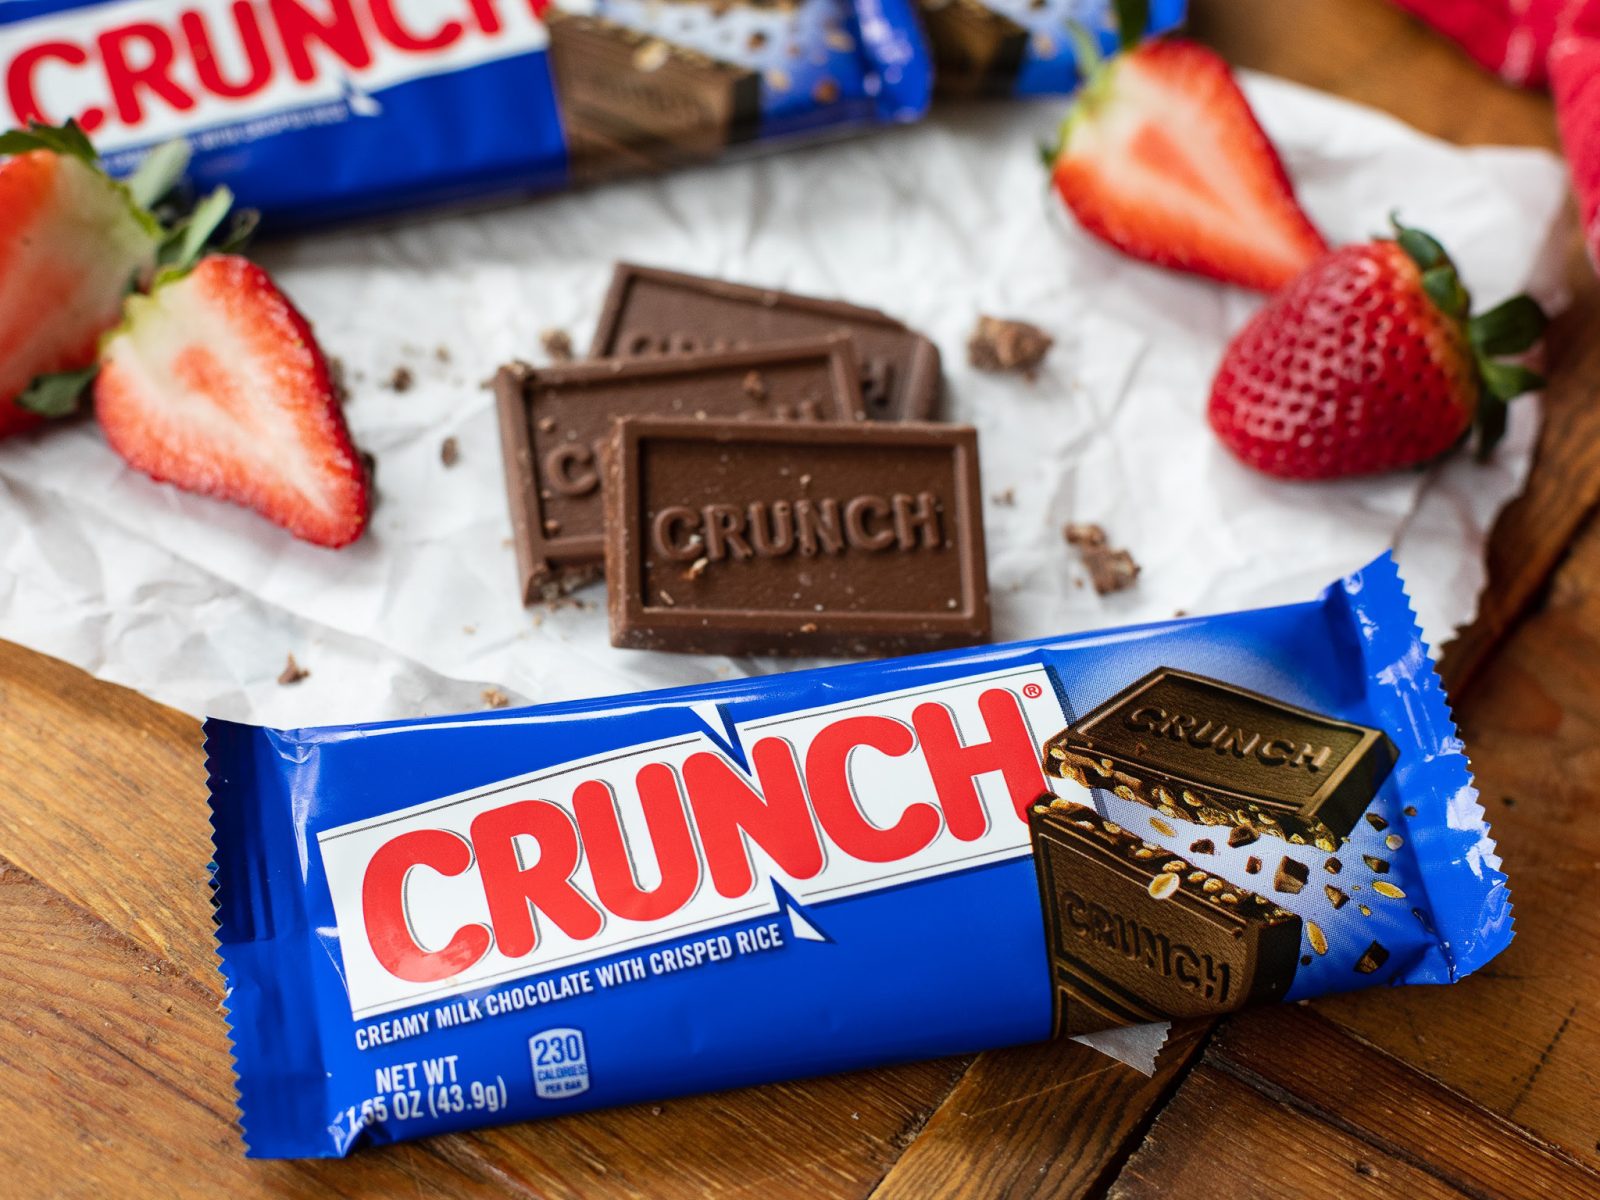 Grab Nestle Crunch Chocolate Bars For Just 74¢ At Kroger